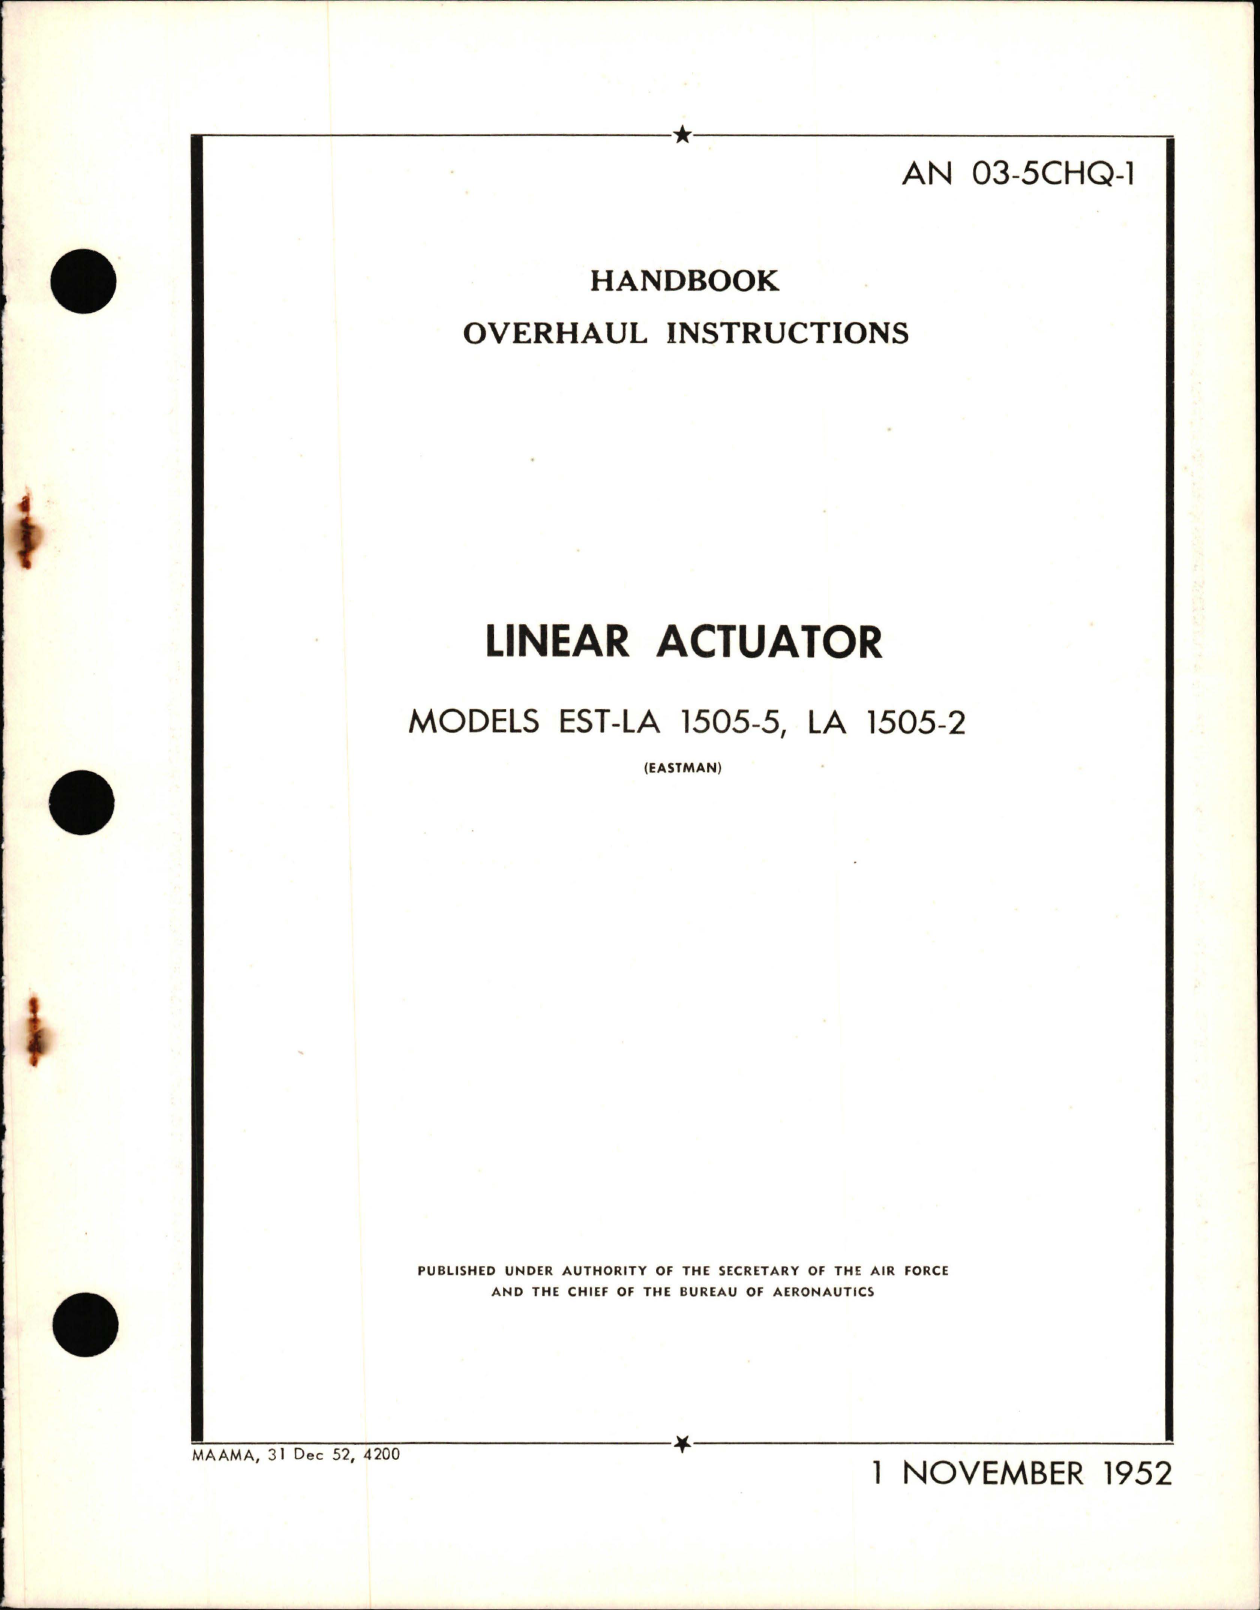 Sample page 1 from AirCorps Library document: Overhaul Instructions for Linear Actuator Models LA 1505-5 and LA 1505-2